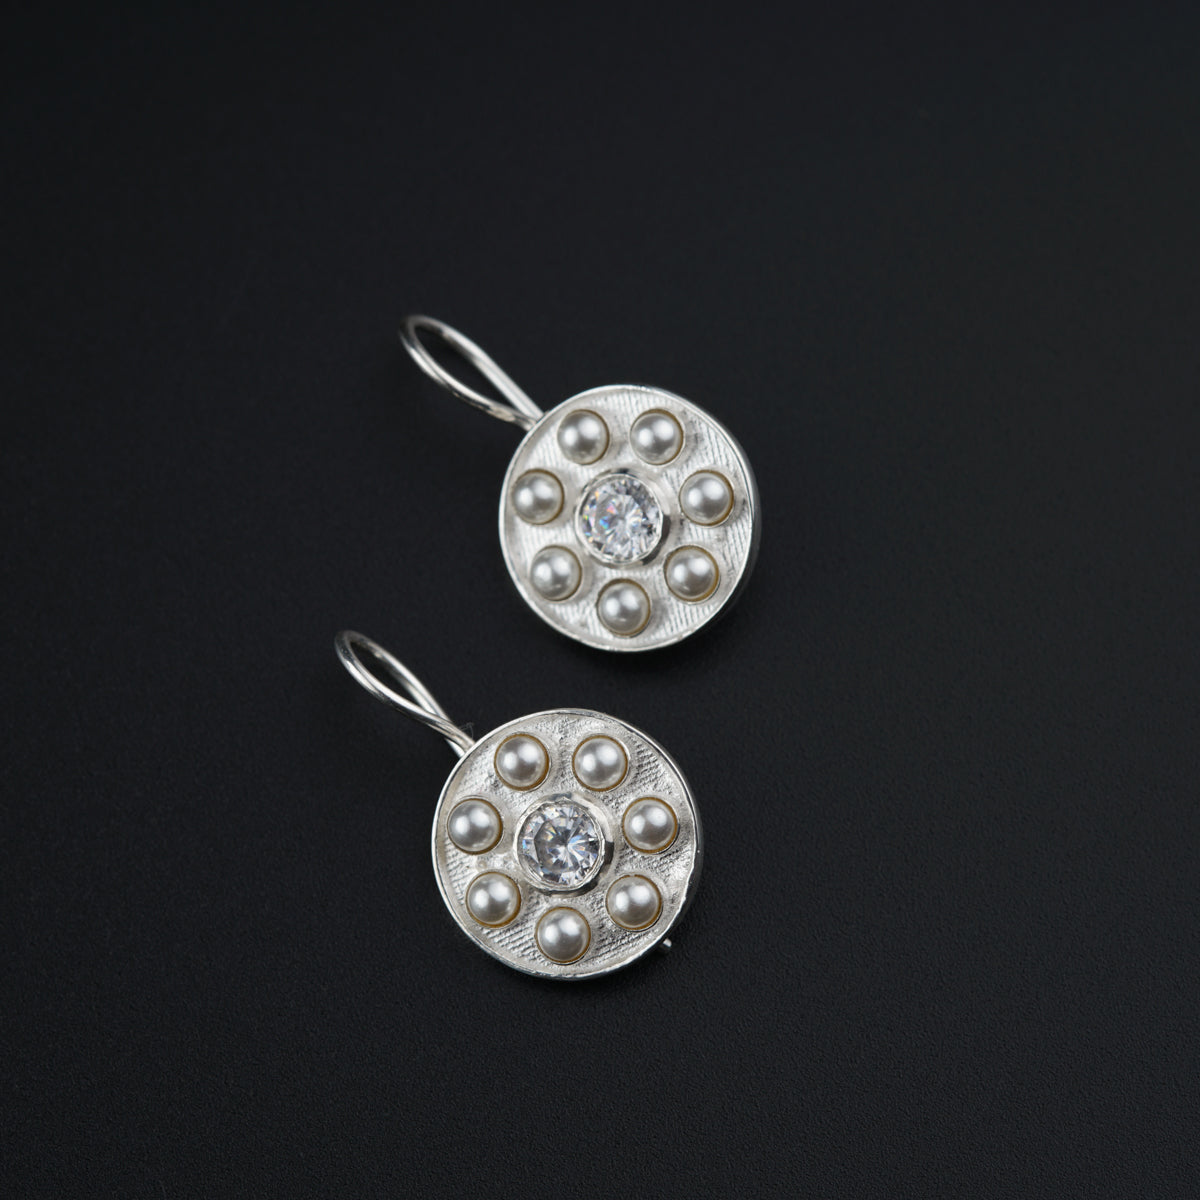 a pair of silver earrings with pearls on them